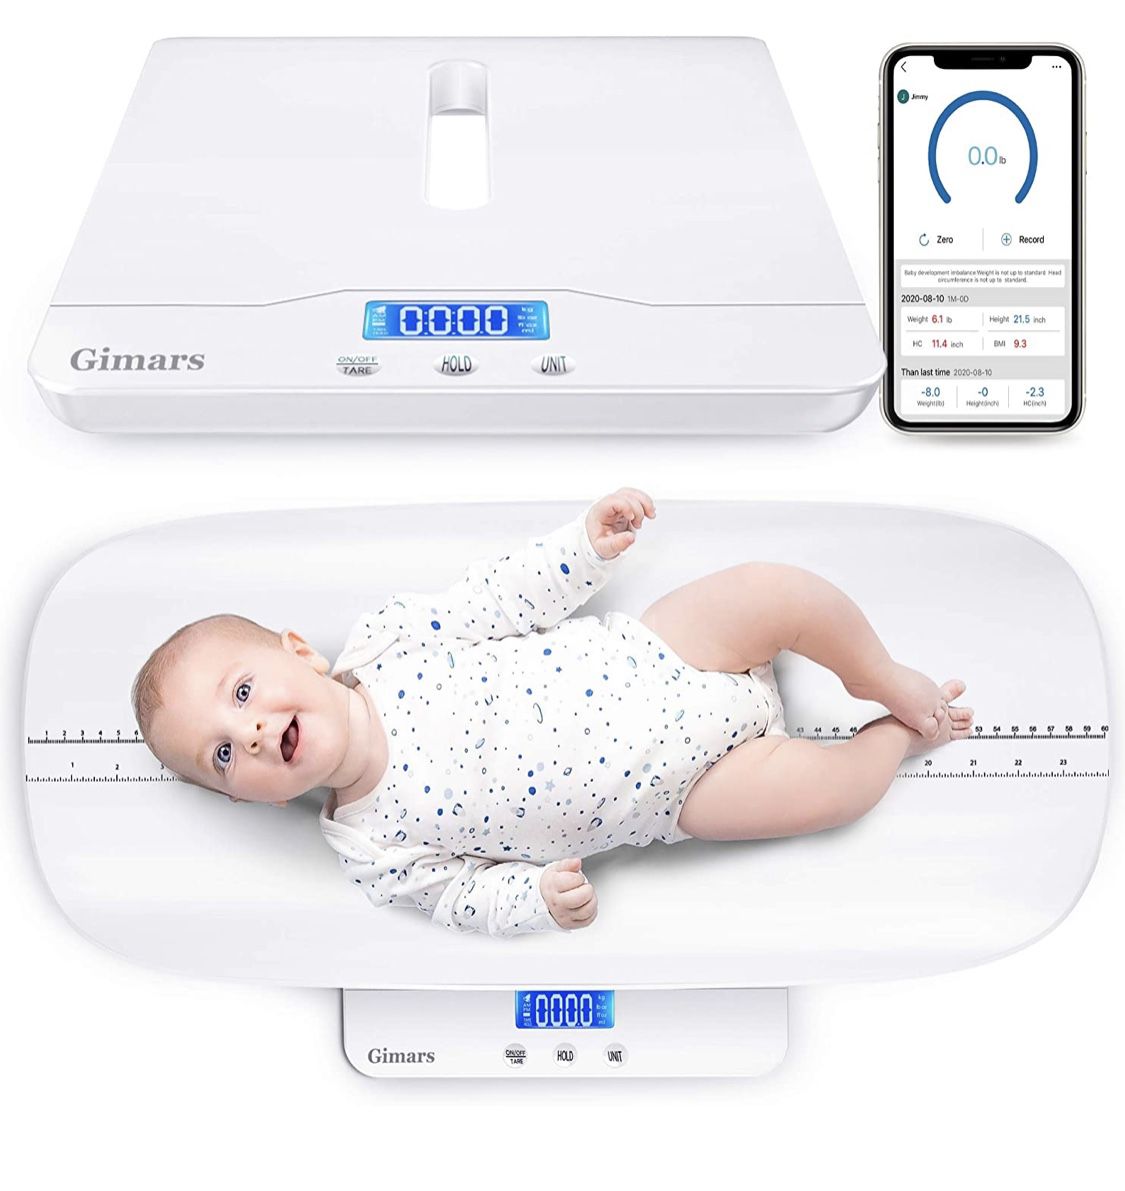 Gimars Smart Baby Scale,Upgraded Family Digital Scale for Infant/Toddler/Adults/Pet